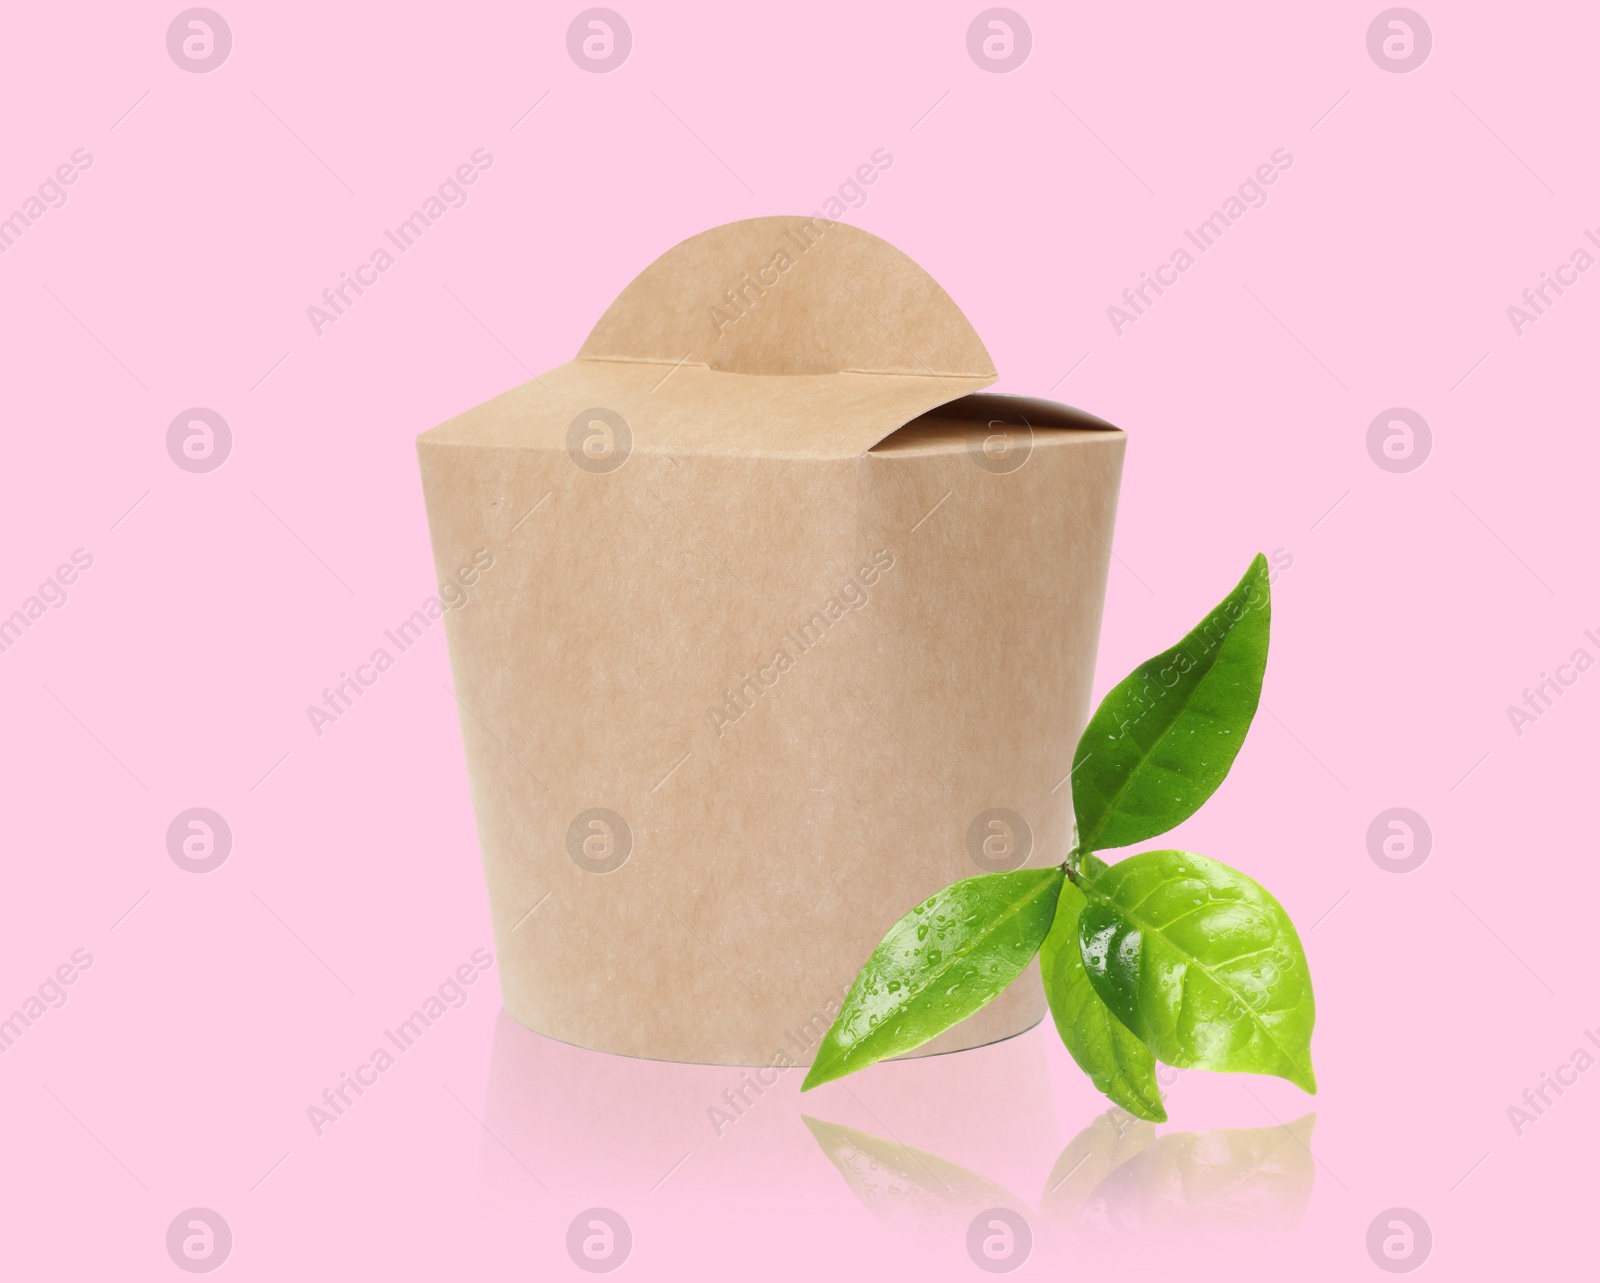 Image of Paper box and green leaves on pink background. Eco friendly lifestyle